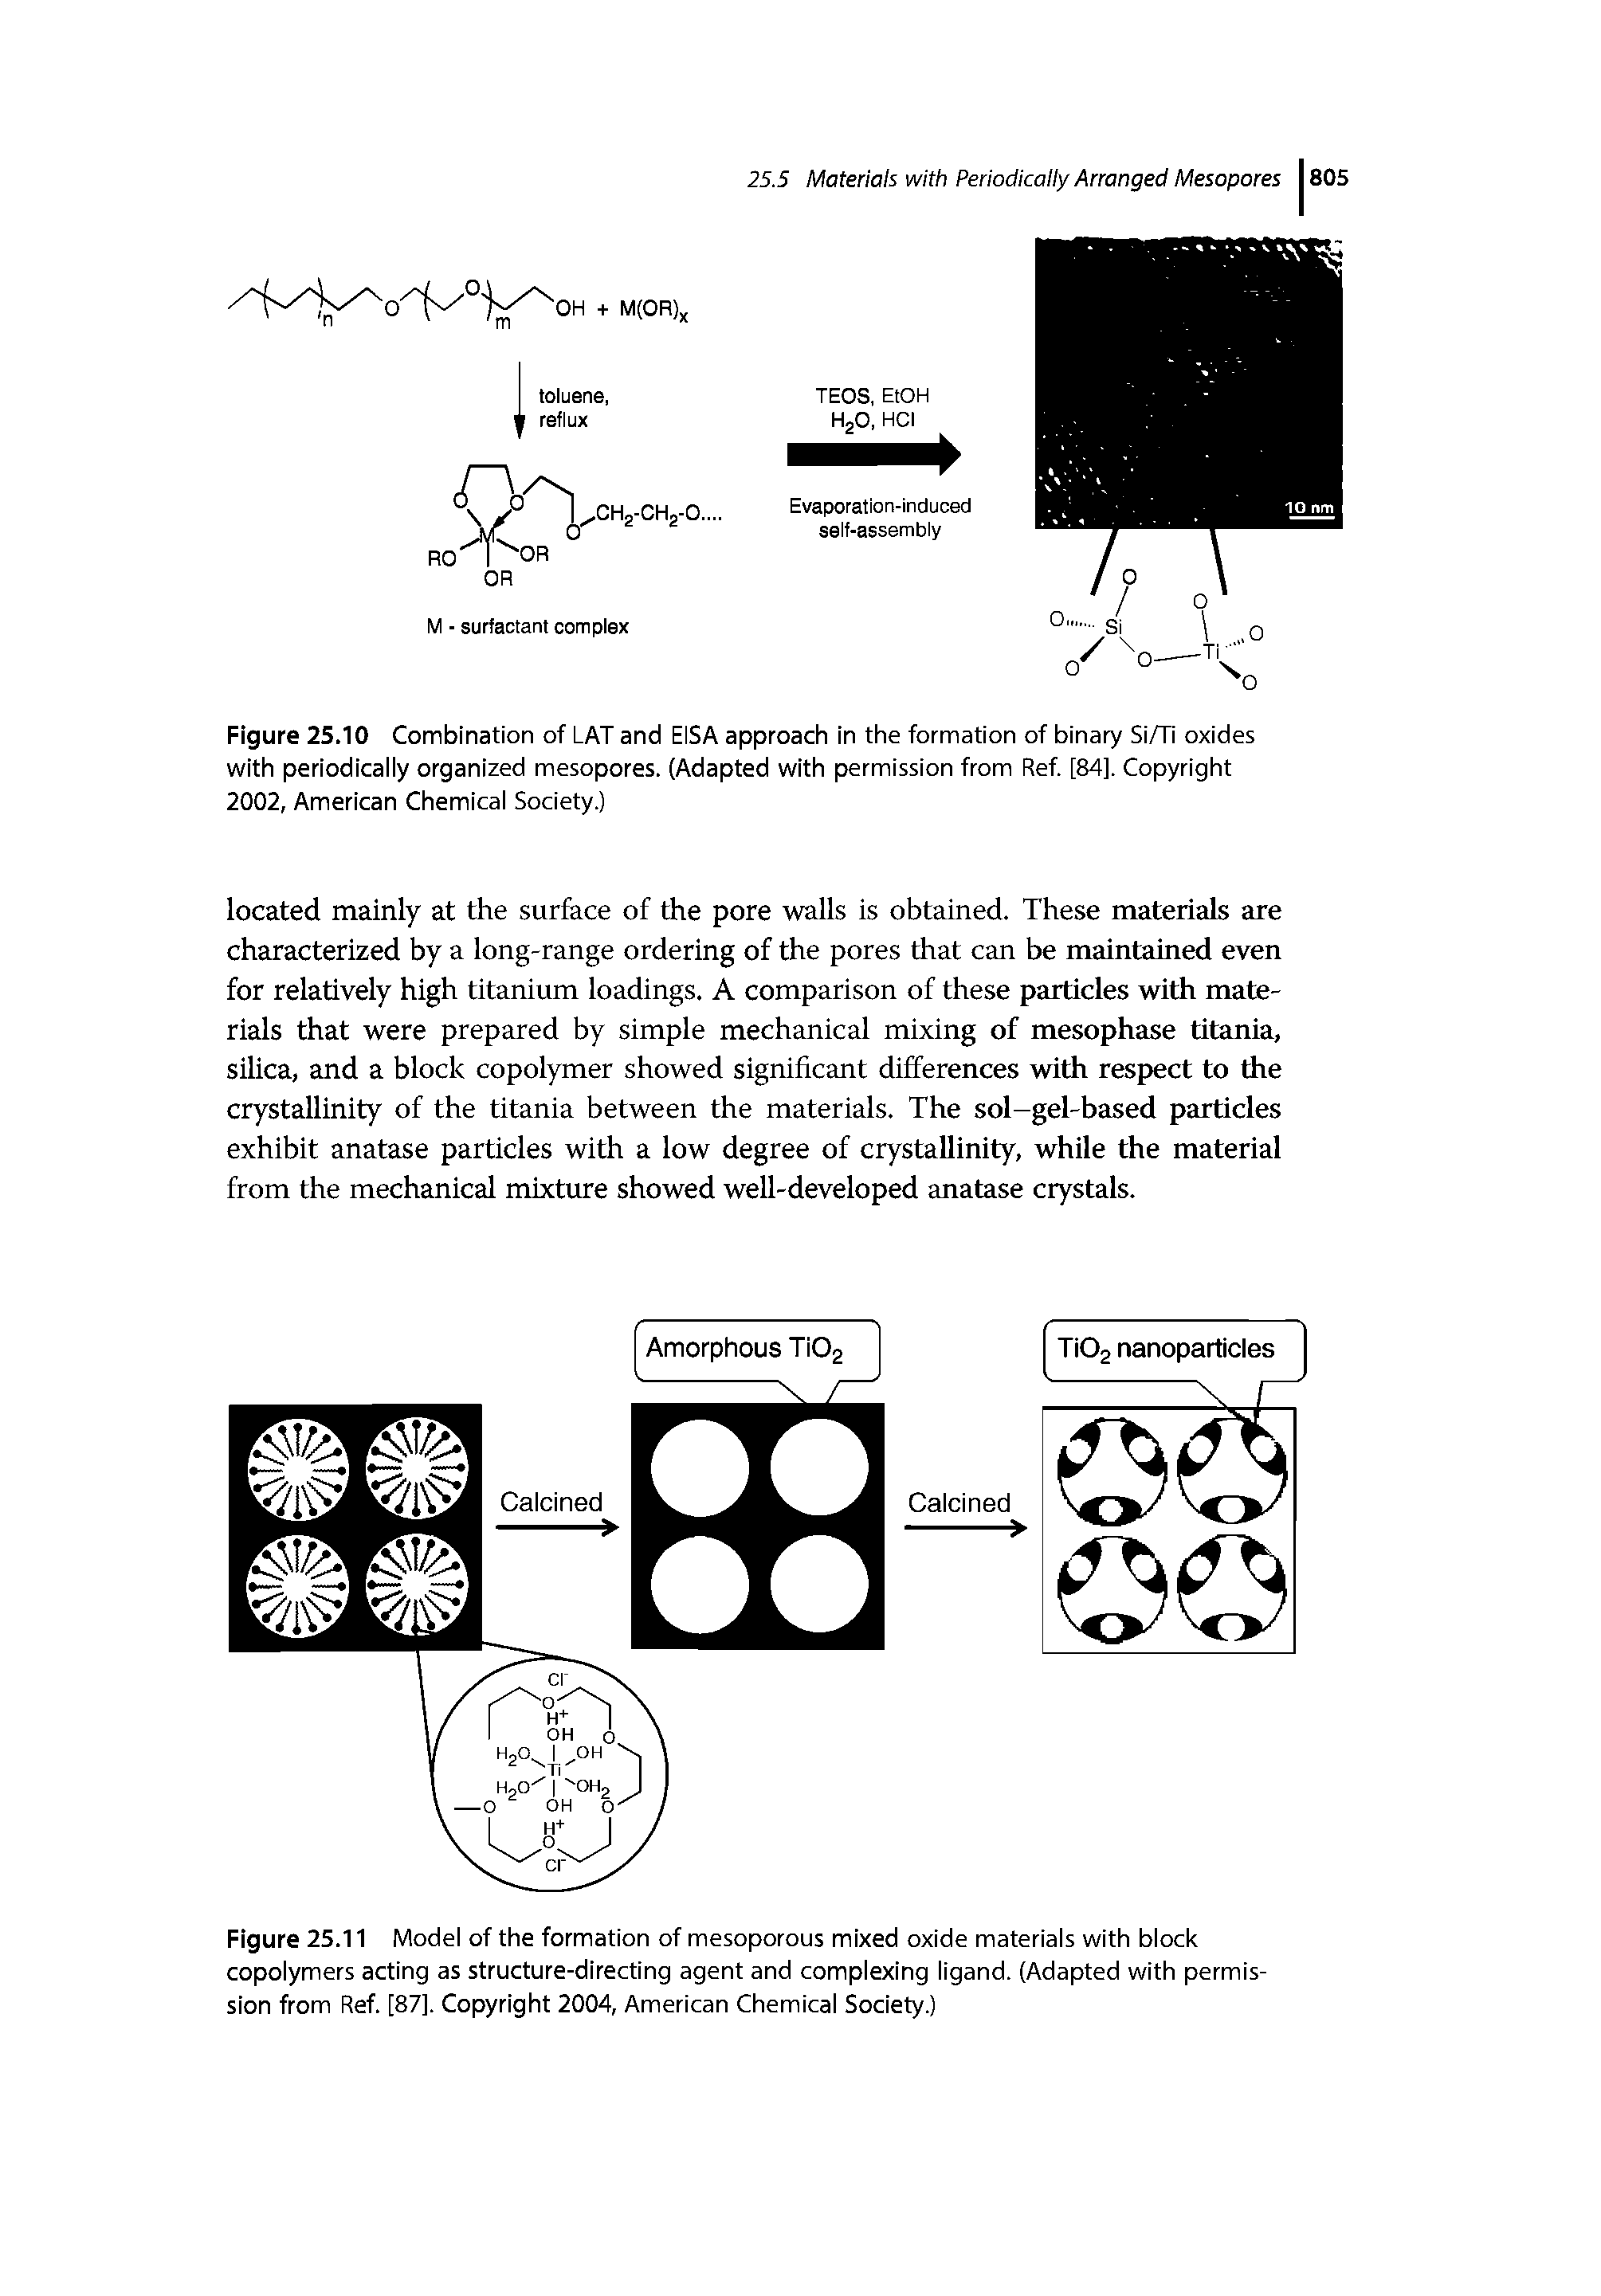 Figure 25.11 Model of the formation of mesoporous mixed oxide materials with block copolymers acting as structure-directing agent and complexing ligand. (Adapted with permission from Ref. [87]. Copyright 2004, American Chemical Society.)...